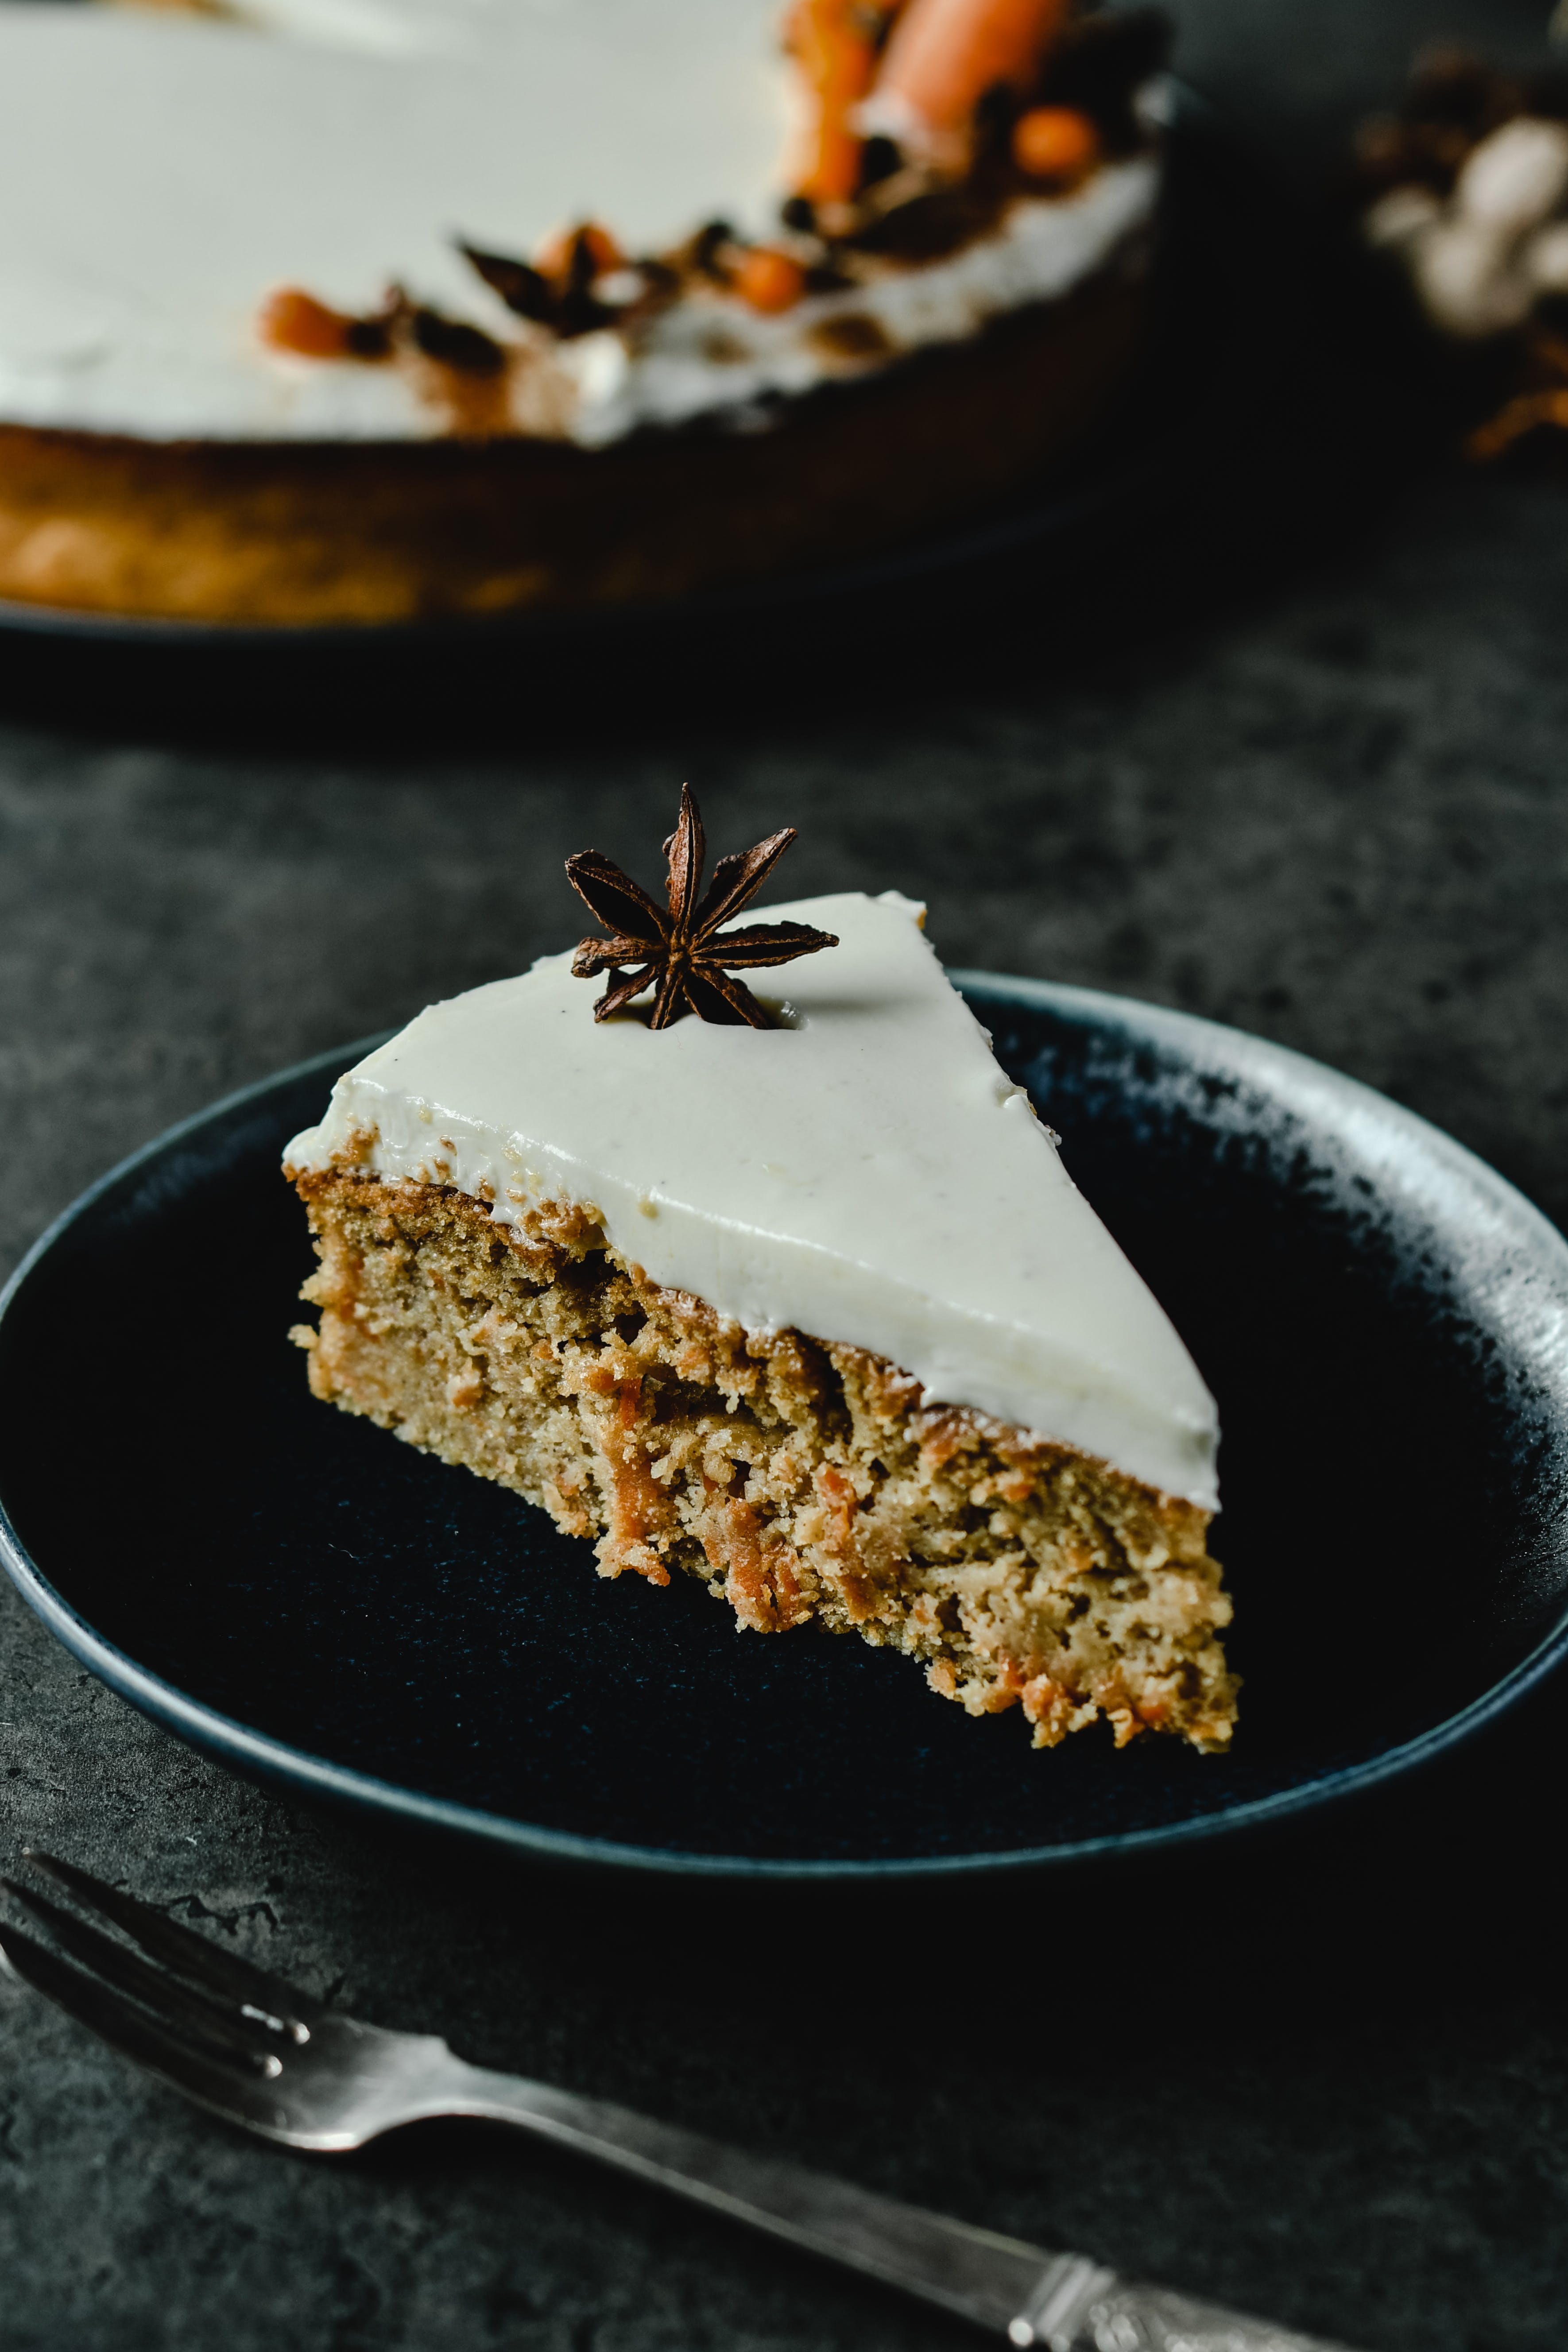 A slice of carrot cake | Source: Pexels